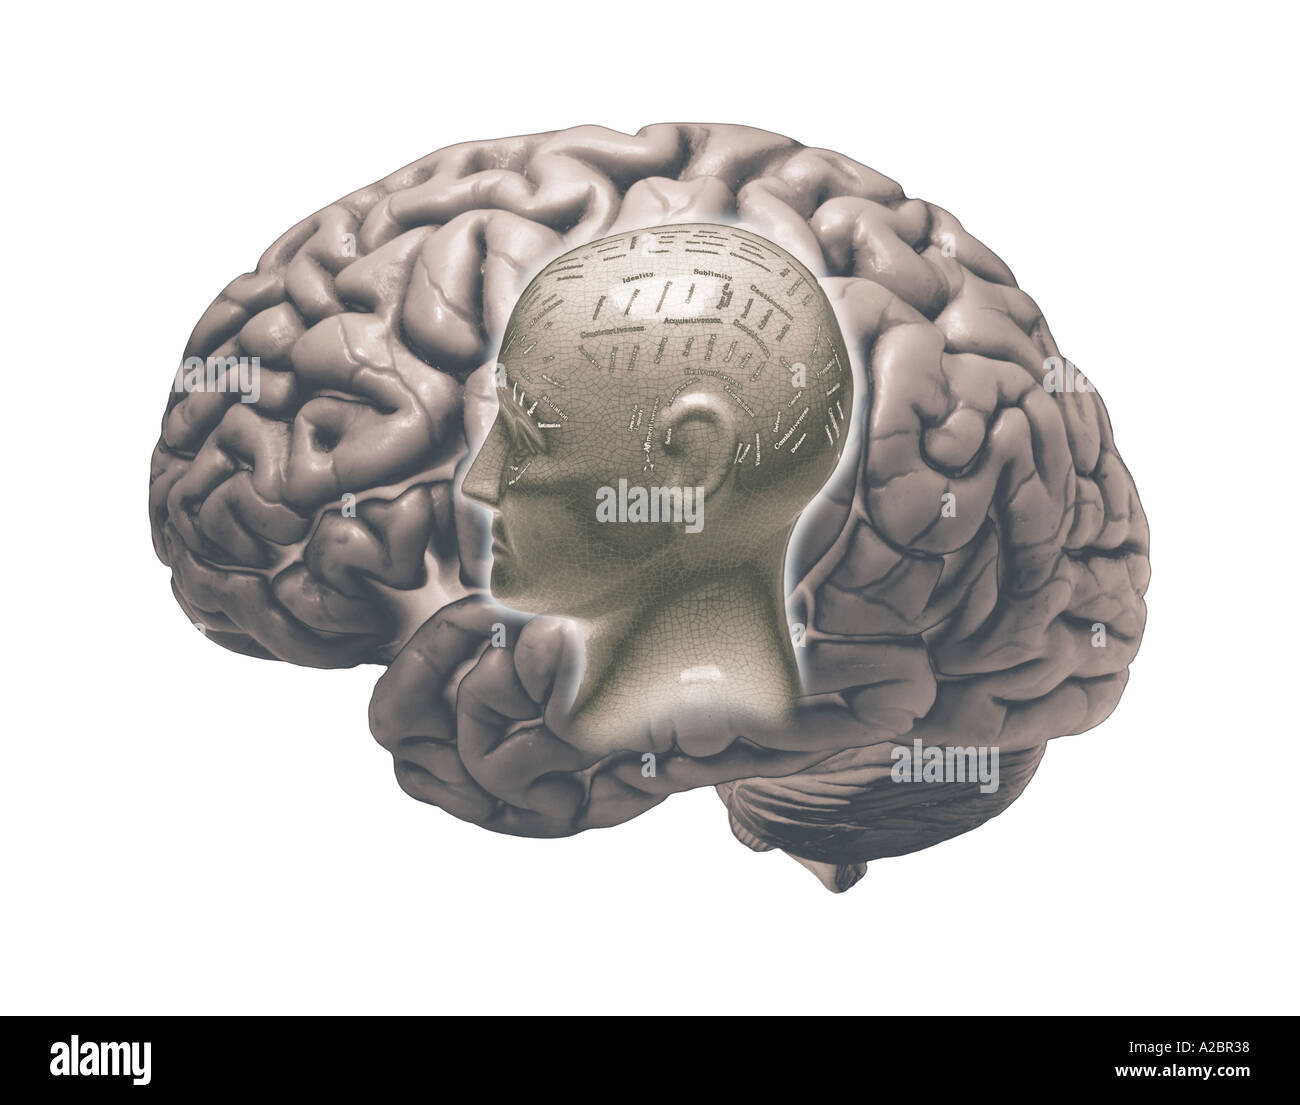 MODEL OF HUMAN BRAIN AND PHRENOLOGY HEAD ON WHITE BACKGROUND Stock Photo